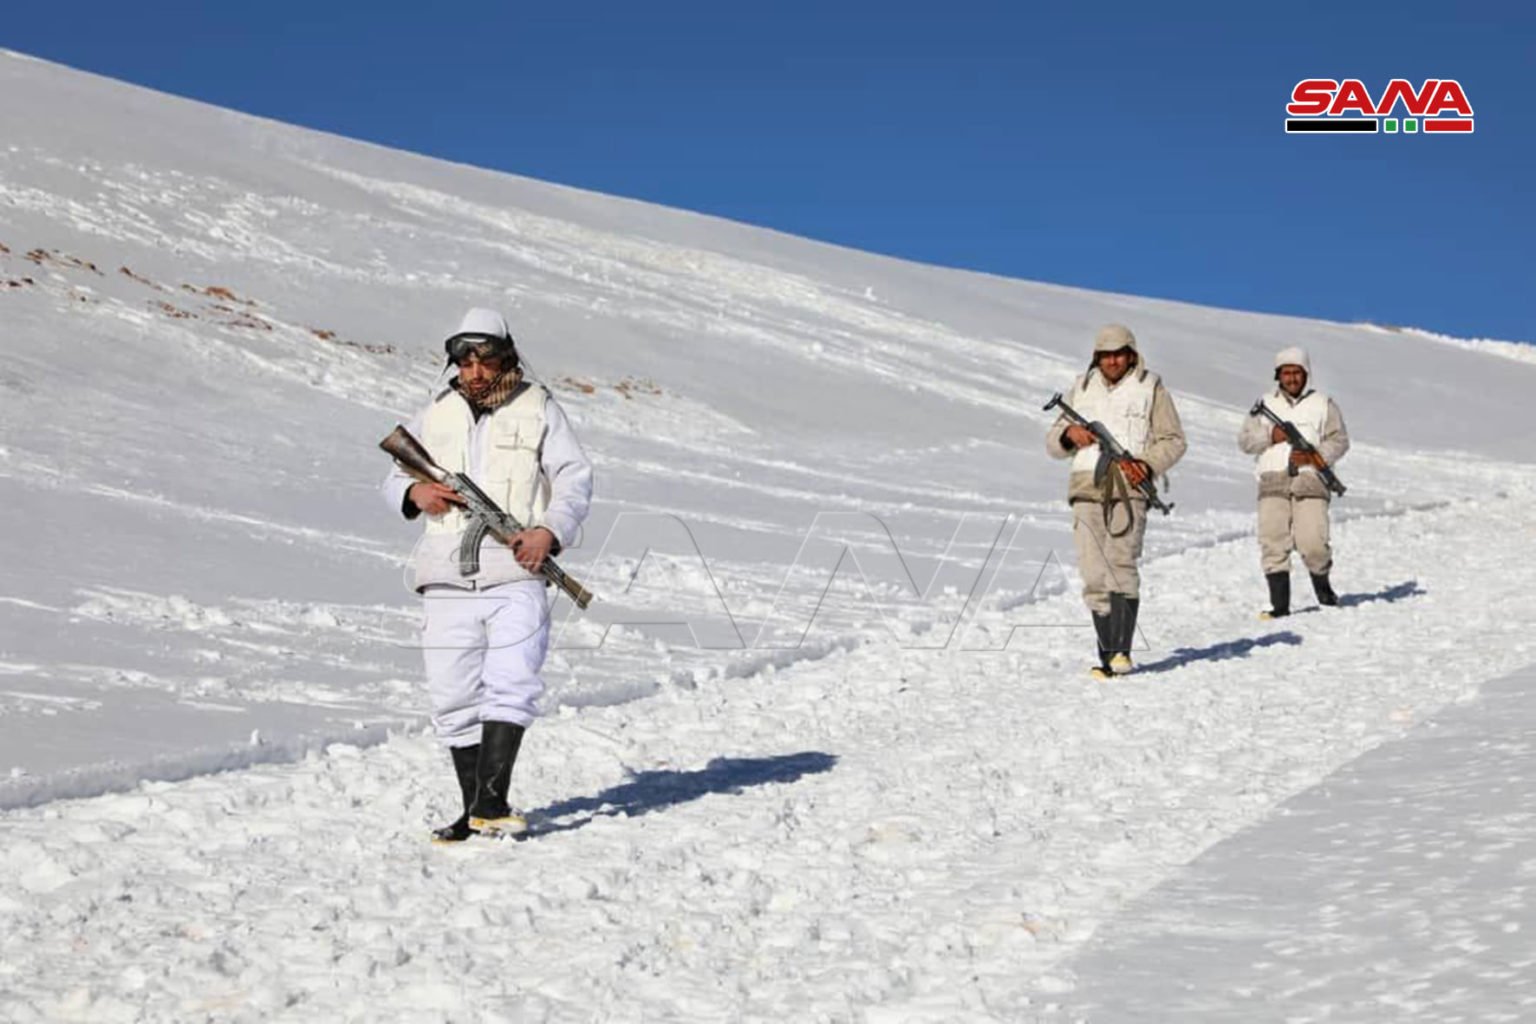 Personnel of the Syrian regime in Mount Hermon, which range covers the Syria-Lebanon- Palestine tri-border region—25 January 2021 (SANA)